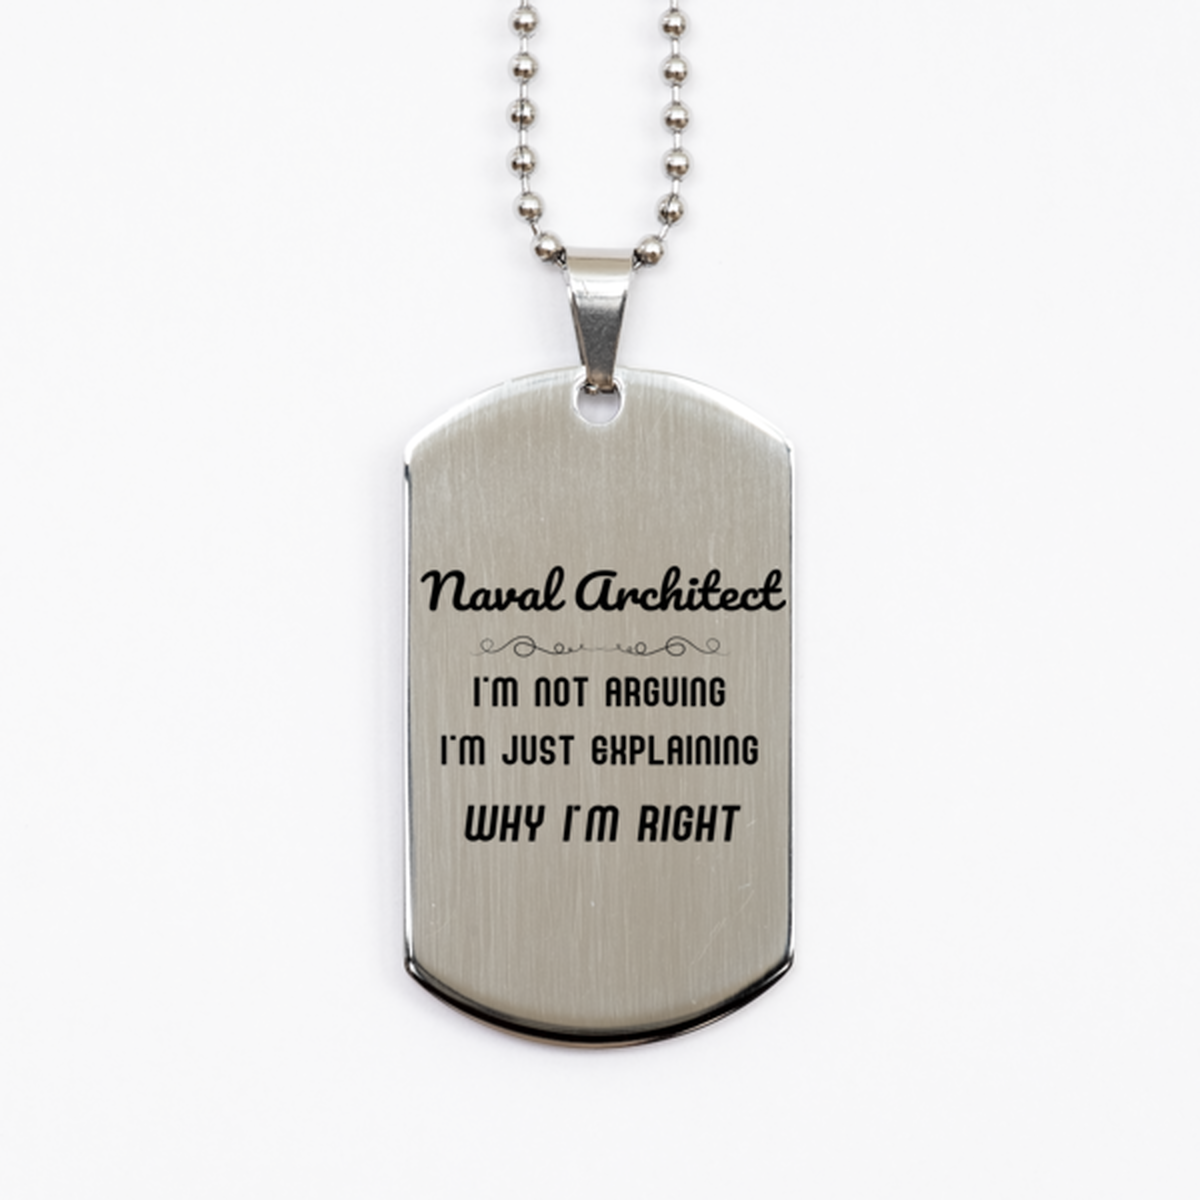 Naval Architect I'm not Arguing. I'm Just Explaining Why I'm RIGHT Silver Dog Tag, Funny Saying Quote Naval Architect Gifts For Naval Architect Graduation Birthday Christmas Gifts for Men Women Coworker